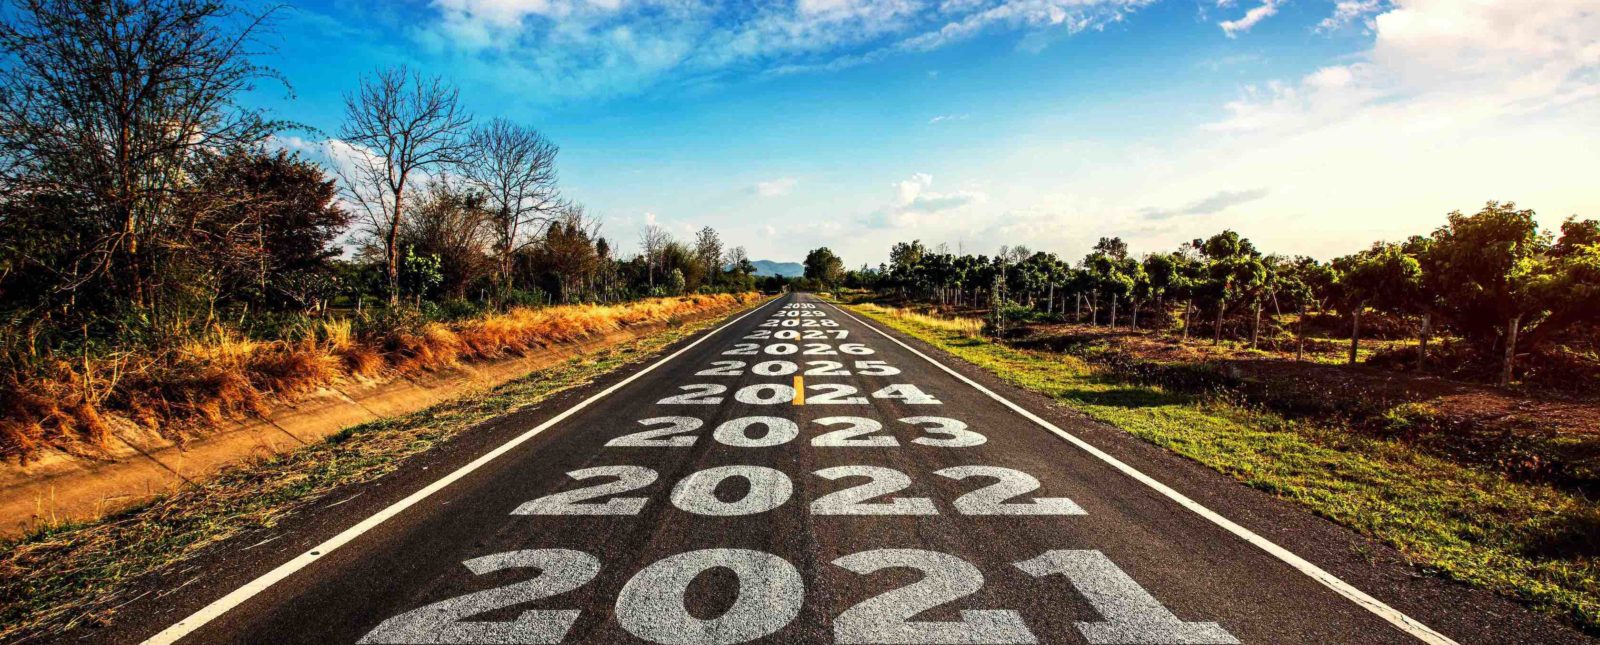 2020-2030 written on highway road in the middle of empty asphalt road and beautiful blue sky.